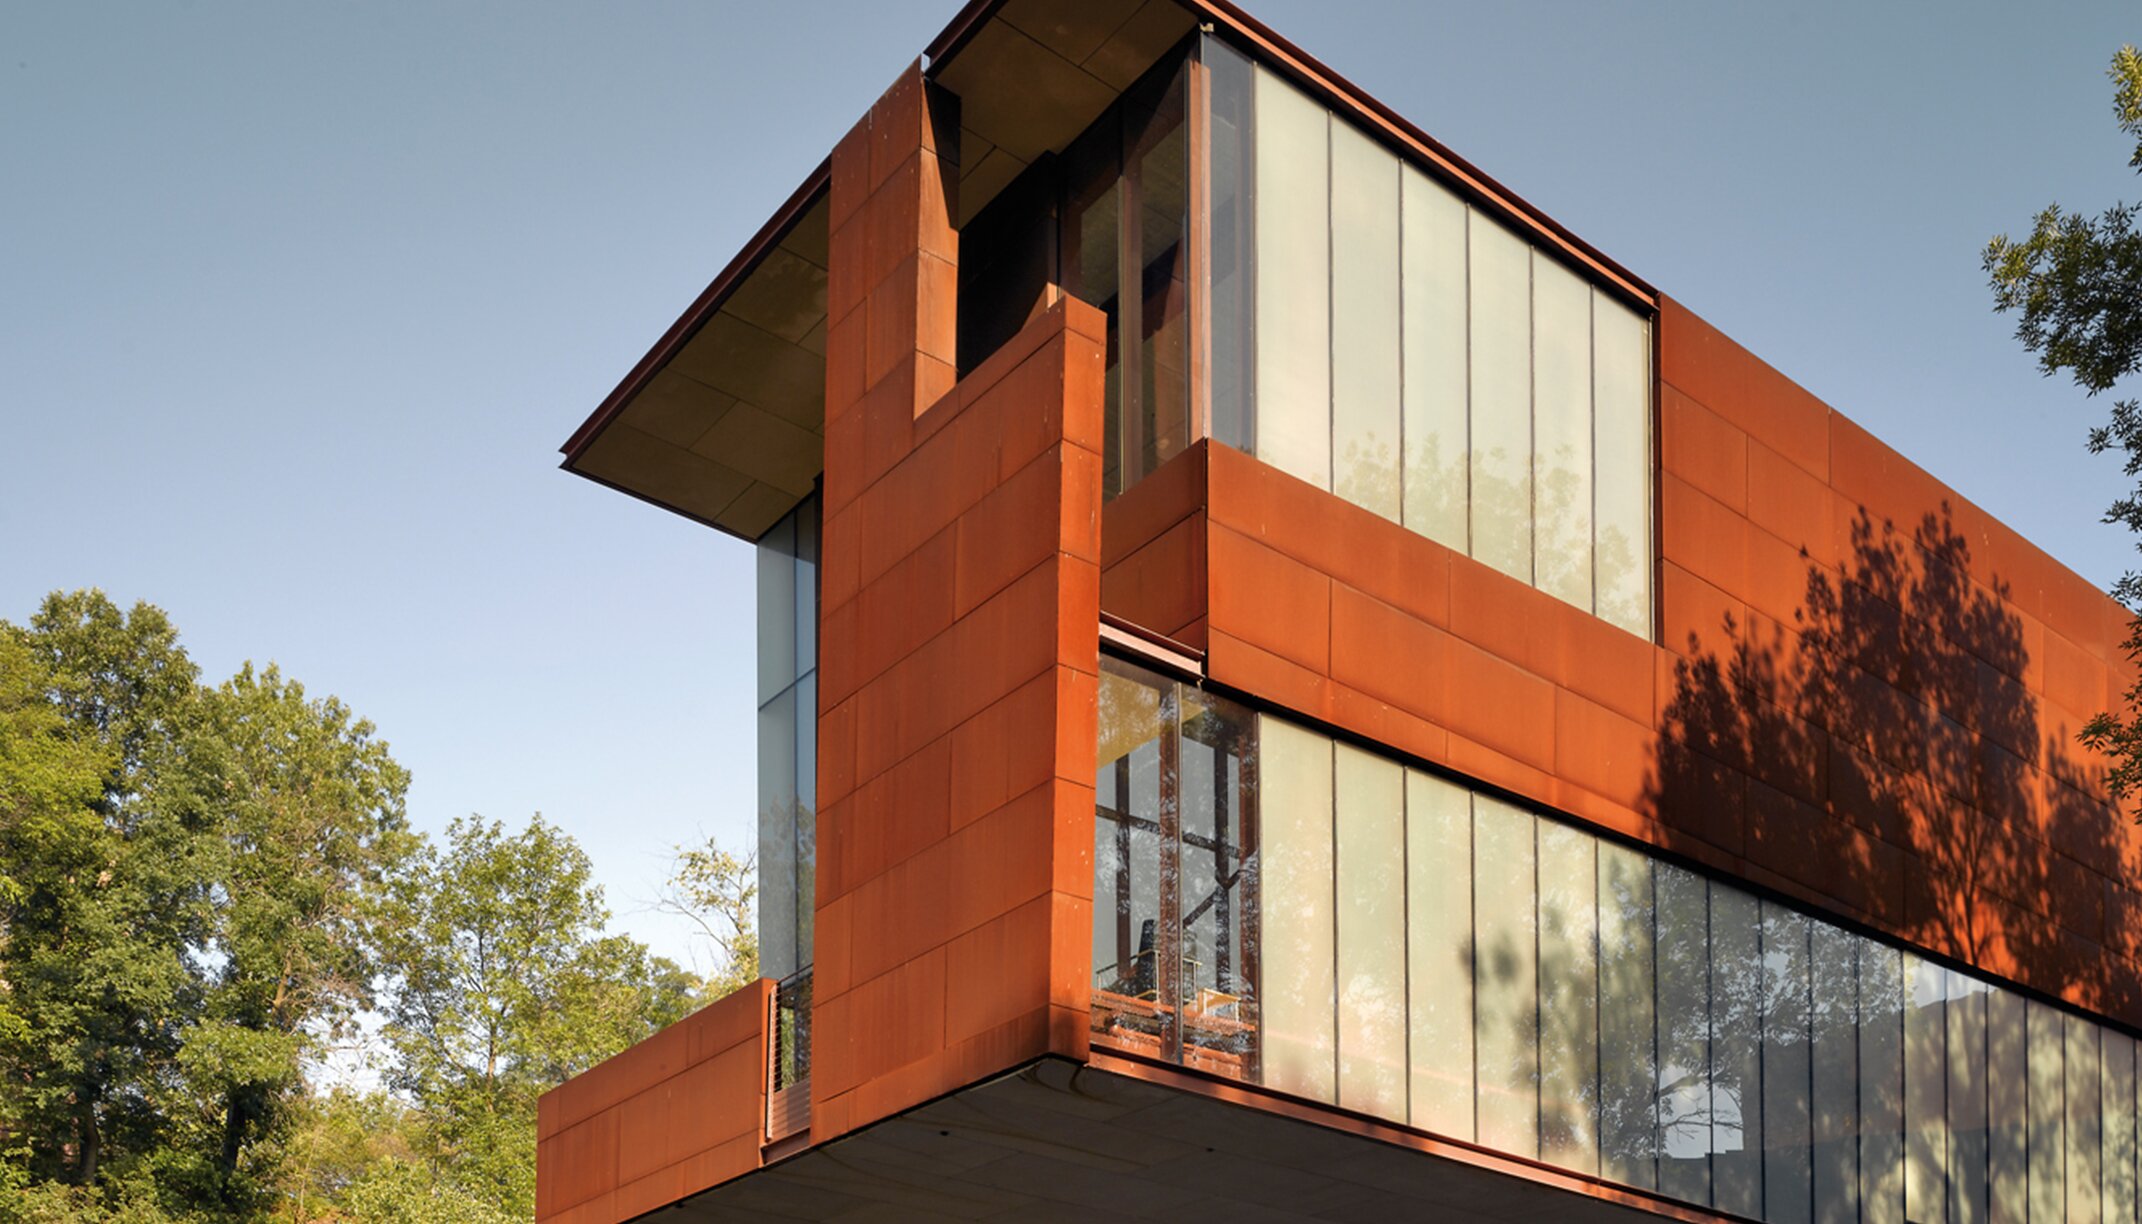 "University of Art and Art History" facade cladding, weathering steel, Iowa City | © Christian Richters Photography